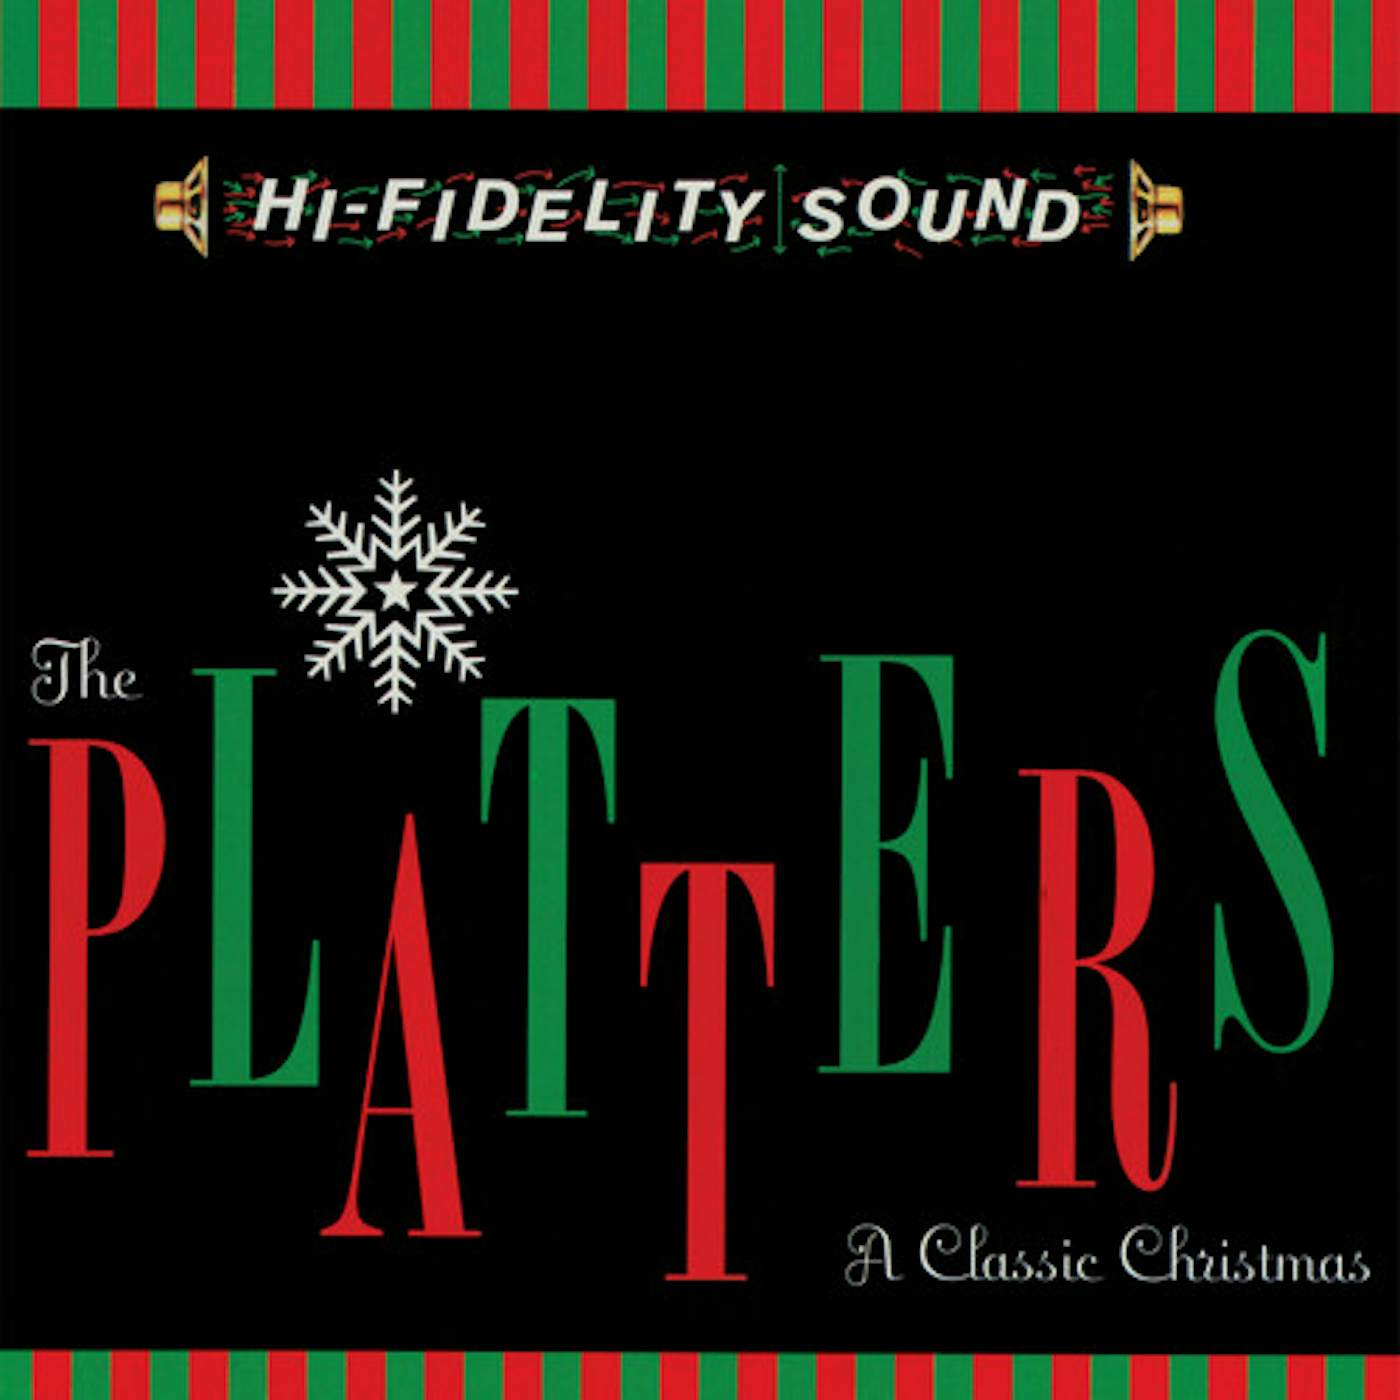 The Platters CLASSIC CHRISTMAS CD